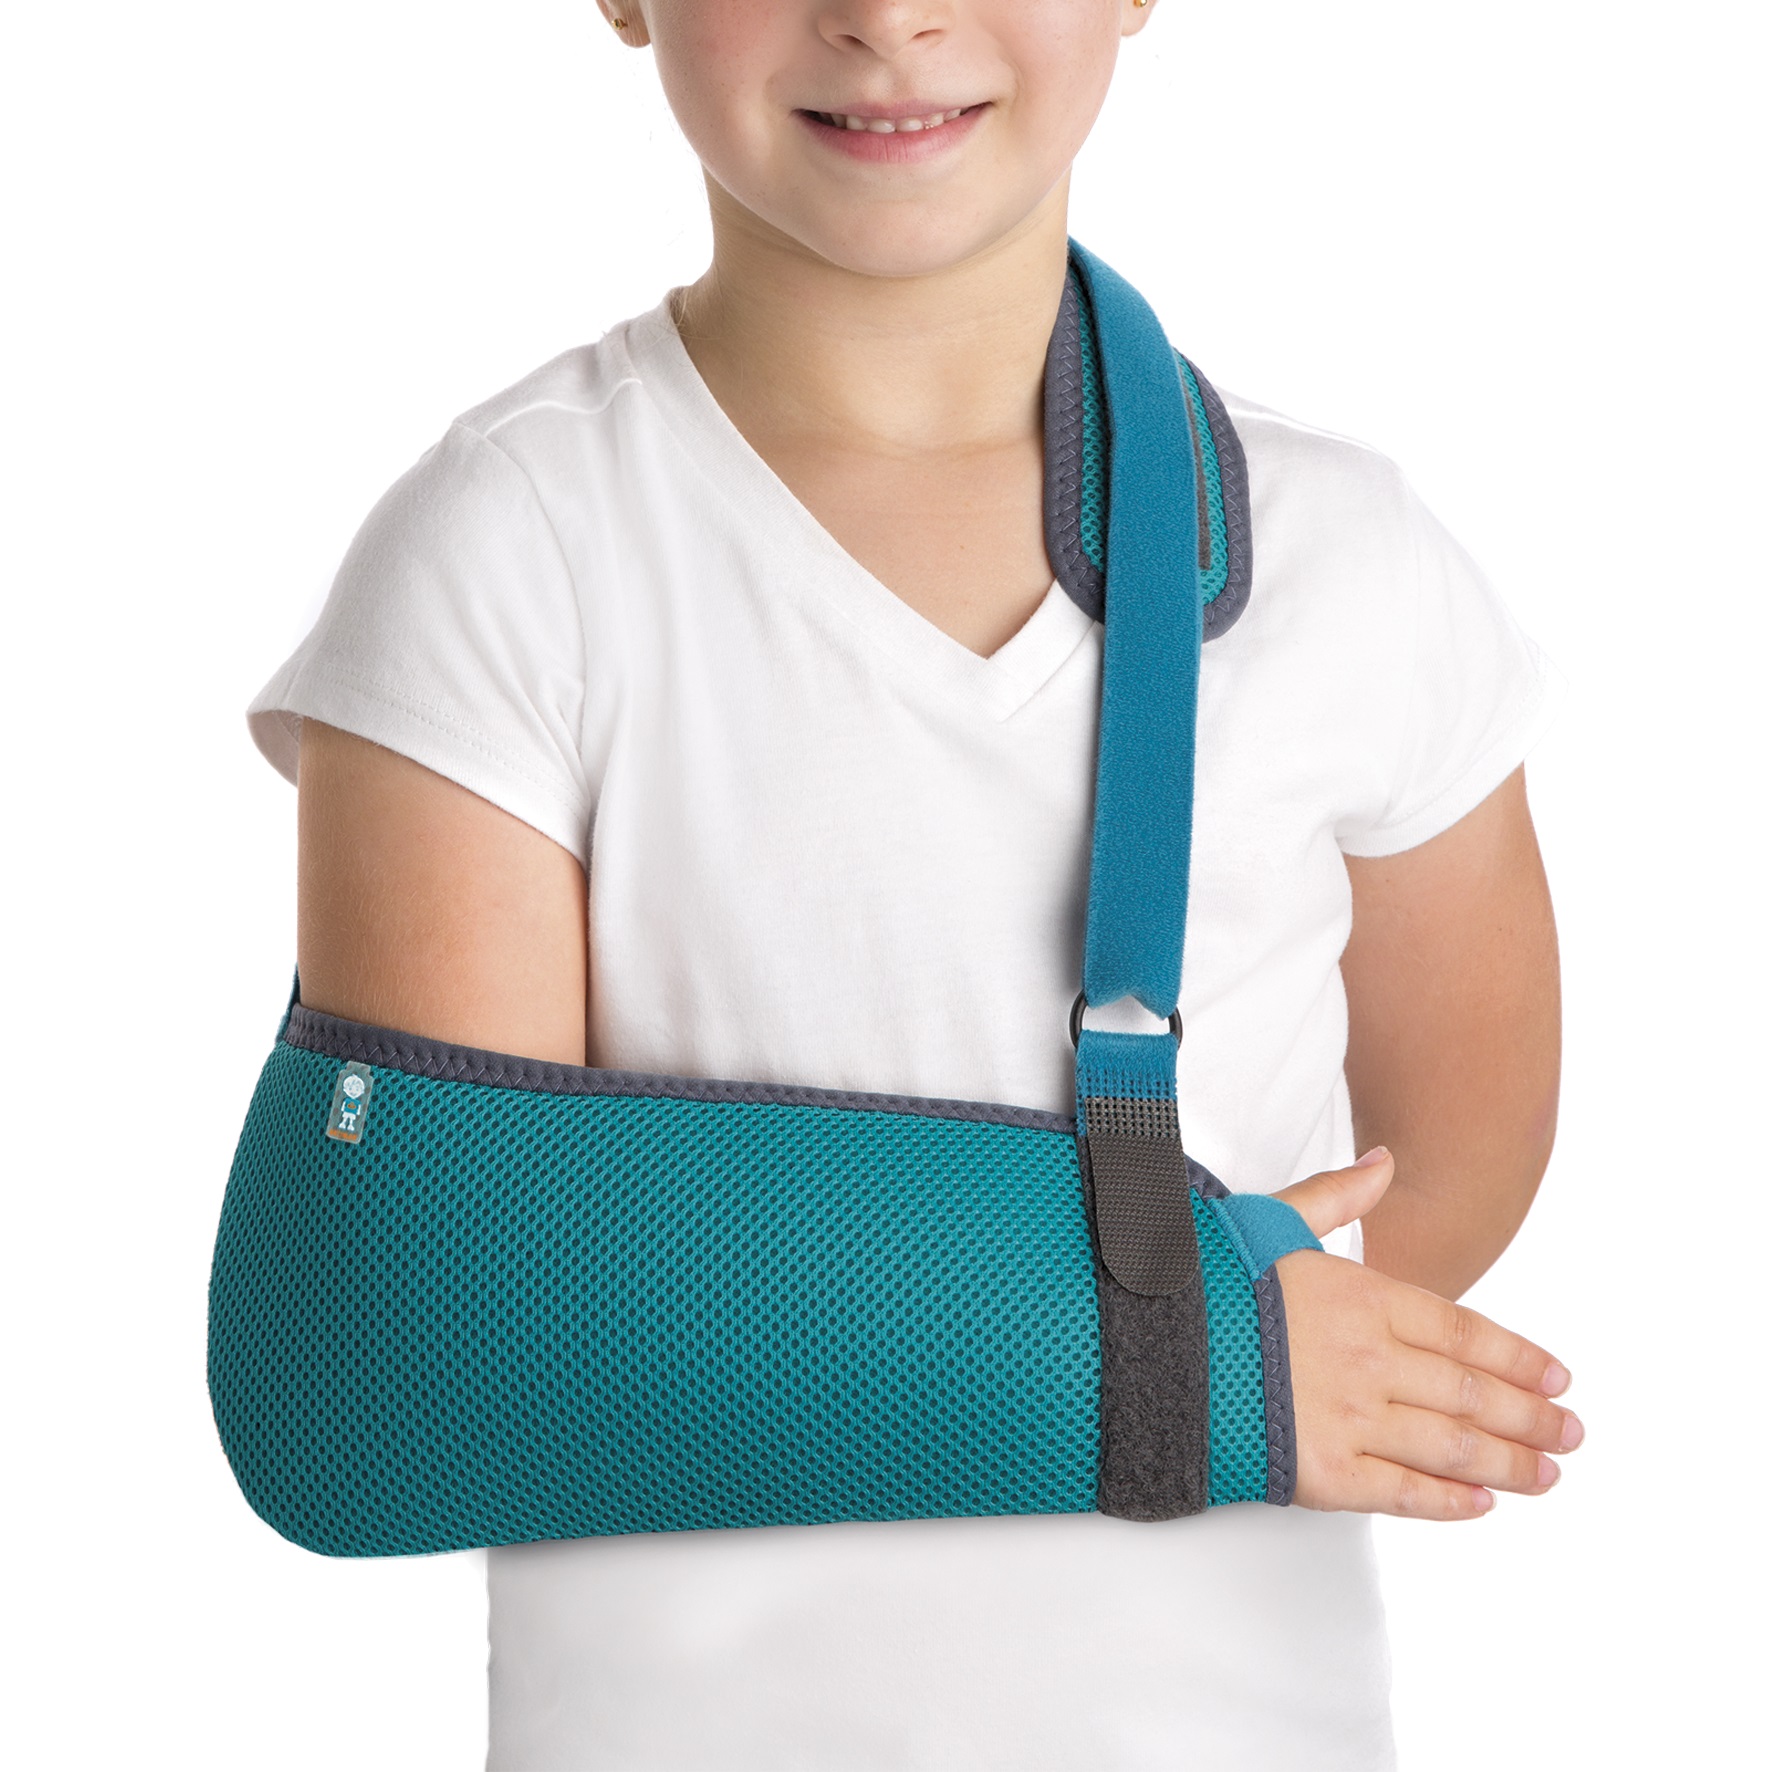 Pediatric & Infant Supports & Orthoses - Feet Conditions